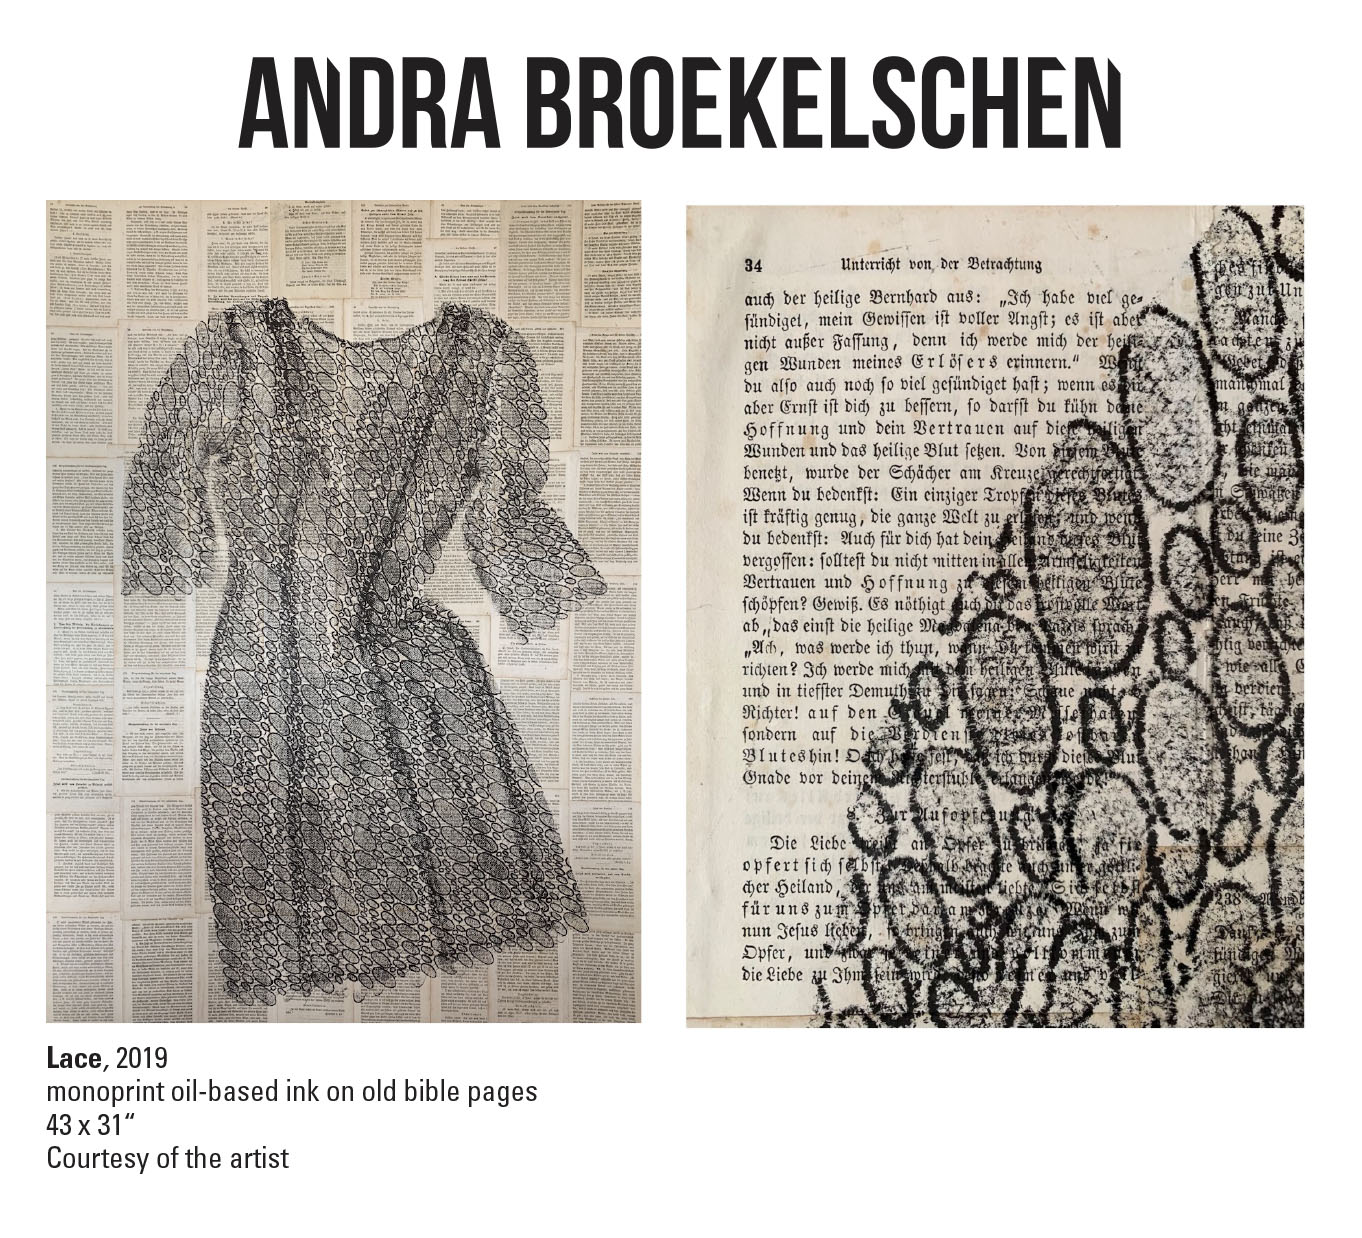 Andrea Broekelschen, Lace, 2019. Monoprint oil-based ink on old bible pages 43 x 31" Courtesy of the artist. A drawing of a dress made up of small oval shapes drawn over bible pages